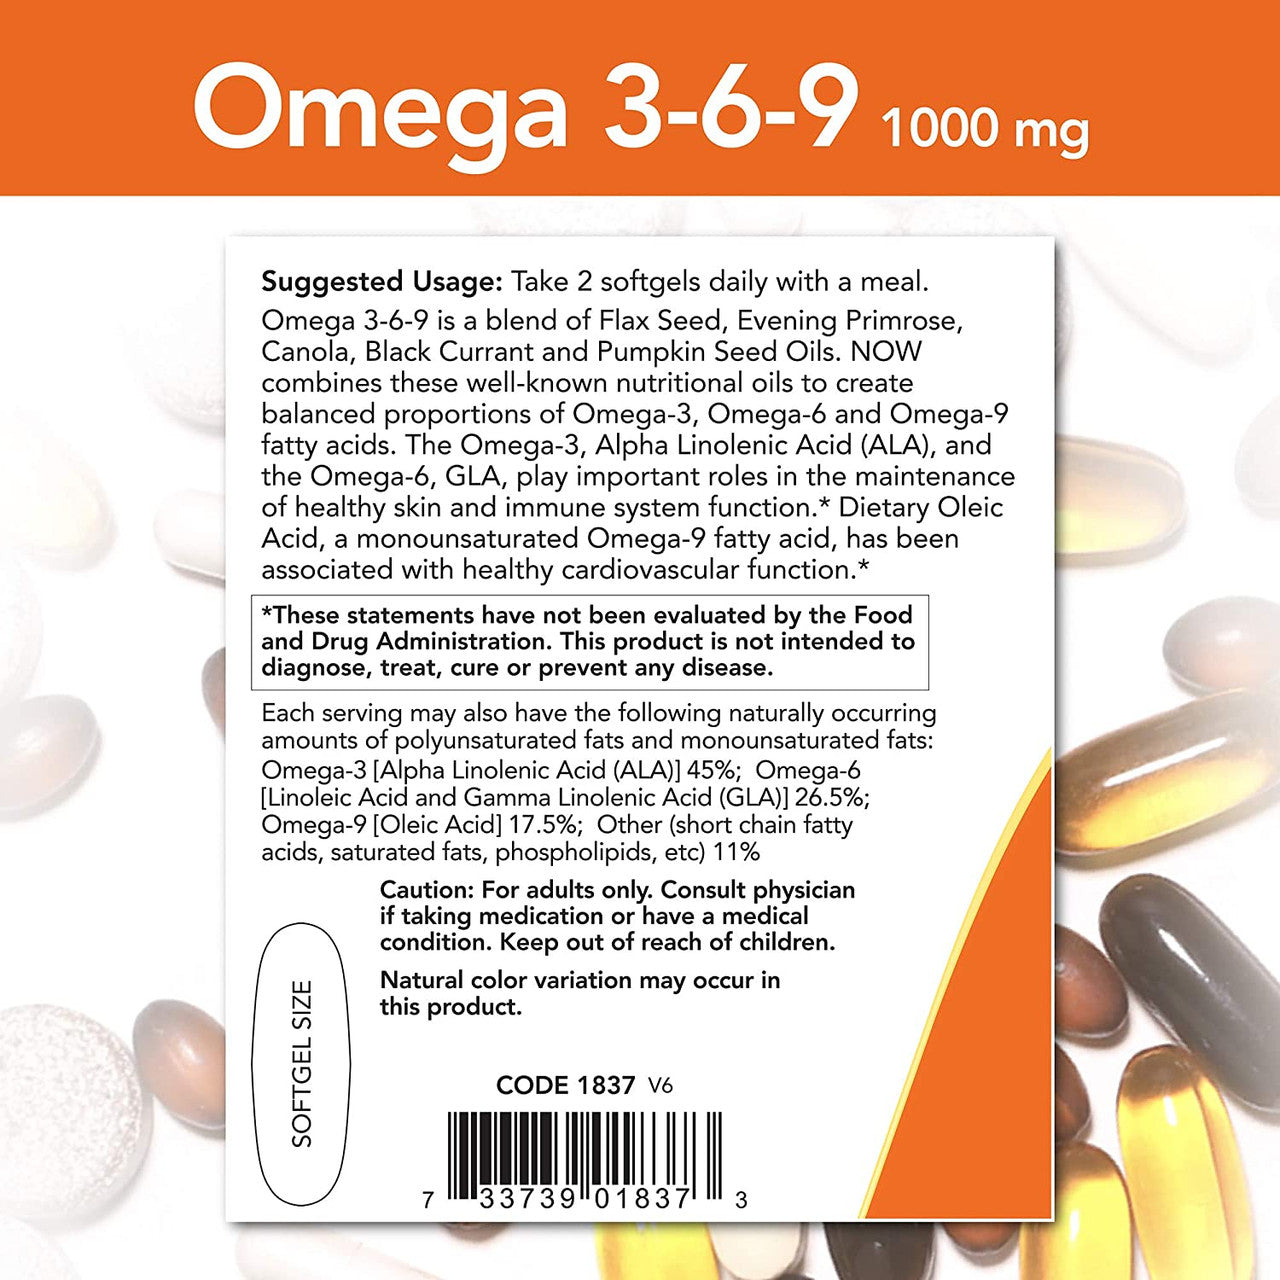 Now Omega 3-6-9 directions